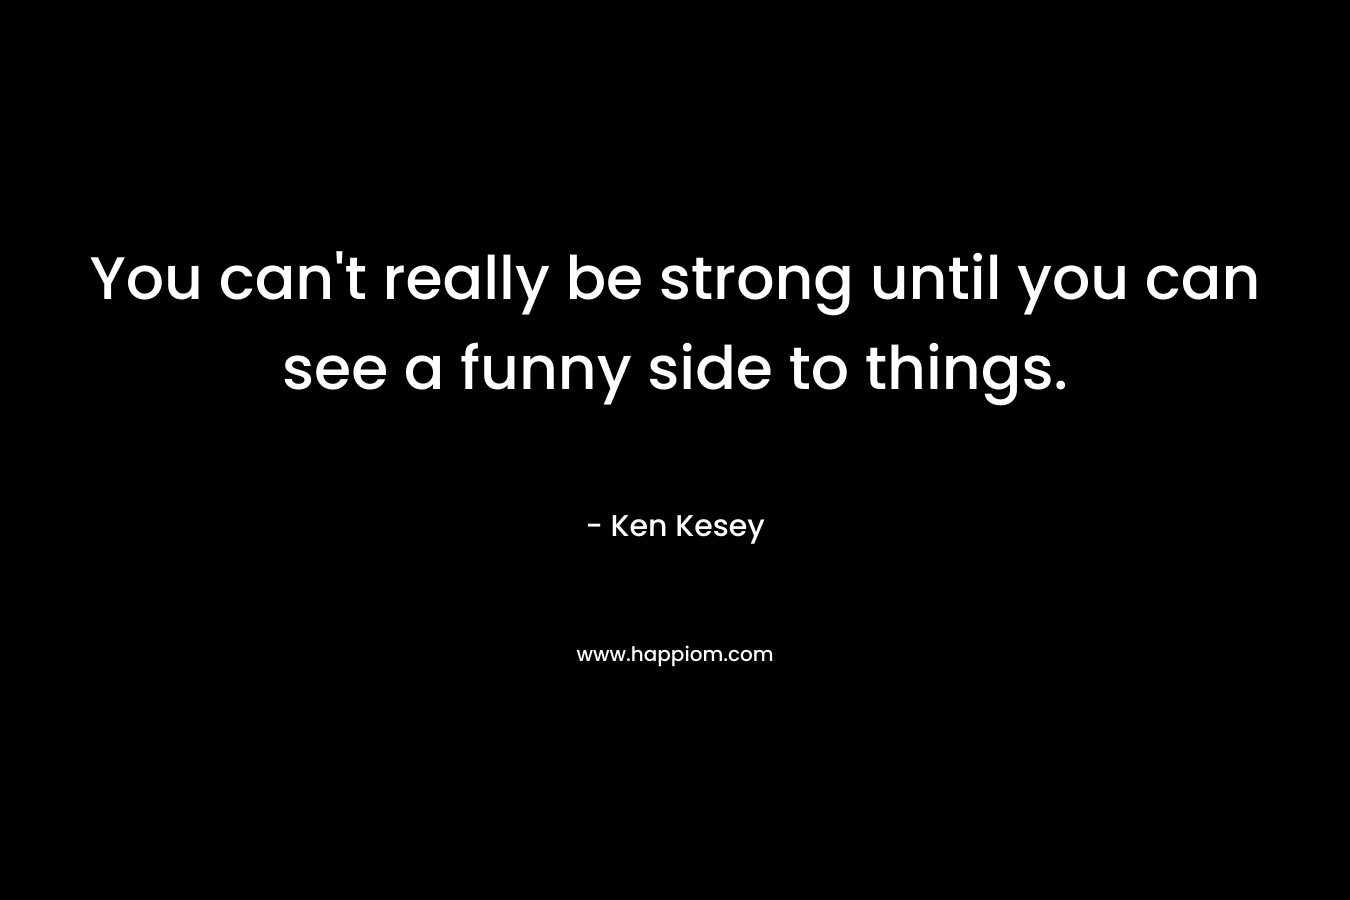 You can’t really be strong until you can see a funny side to things. – Ken Kesey